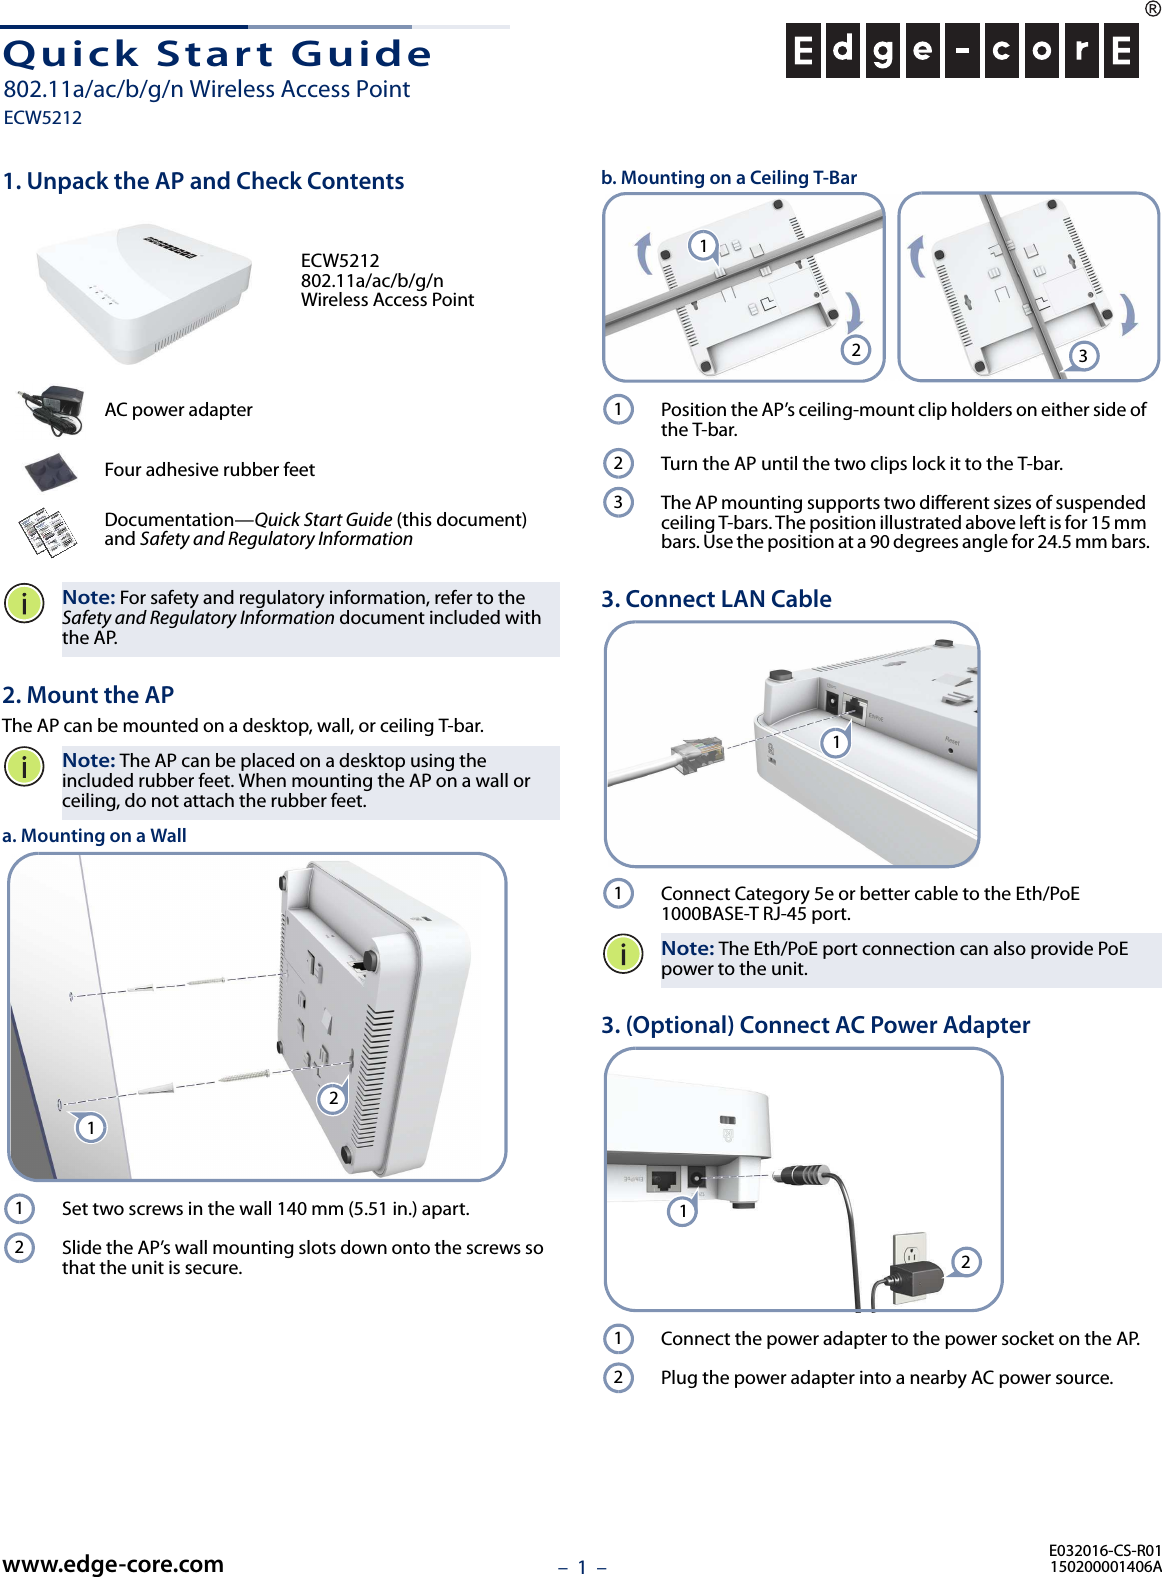 –  1  –Quick Start Guide1. Unpack the AP and Check ContentsECW5212 802.11a/ac/b/g/n Wireless Access PointAC power adapterFour adhesive rubber feetDocumentation—Quick Start Guide (this document) and Safety and Regulatory InformationNote: For safety and regulatory information, refer to the Safety and Regulatory Information document included with the AP.2. Mount the APThe AP can be mounted on a desktop, wall, or ceiling T-bar.Note: The AP can be placed on a desktop using the included rubber feet. When mounting the AP on a wall or ceiling, do not attach the rubber feet.a. Mounting on a WallSet two screws in the wall 140 mm (5.51 in.) apart.Slide the AP’s wall mounting slots down onto the screws so that the unit is secure.1212b. Mounting on a Ceiling T-BarPosition the AP’s ceiling-mount clip holders on either side of the T-bar.Turn the AP until the two clips lock it to the T-bar.The AP mounting supports two different sizes of suspended ceiling T-bars. The position illustrated above left is for 15 mm bars. Use the position at a 90 degrees angle for 24.5 mm bars.3. Connect LAN CableConnect Category 5e or better cable to the Eth/PoE 1000BASE-T RJ-45 port.Note: The Eth/PoE port connection can also provide PoE power to the unit.3. (Optional) Connect AC Power AdapterConnect the power adapter to the power socket on the AP. Plug the power adapter into a nearby AC power source.213123111212E032016-CS-R01150200001406Awww.edge-core.com802.11a/ac/b/g/n Wireless Access PointECW5212